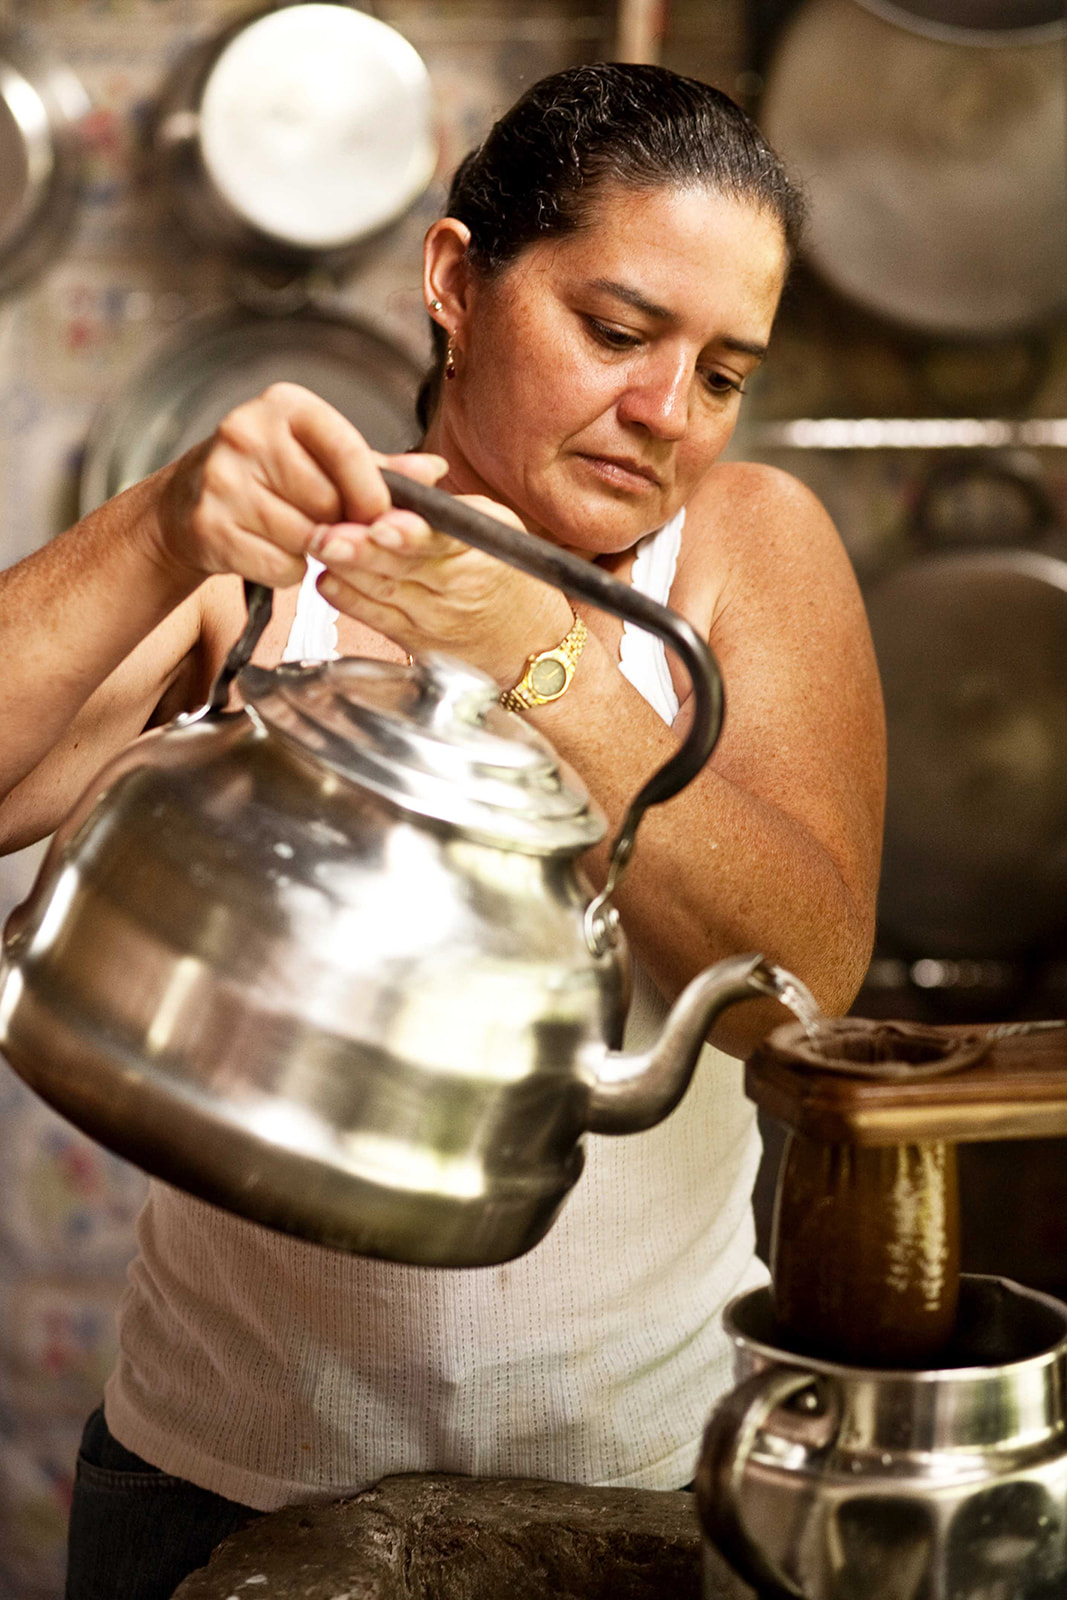 Woman making coffee the traditional Costa Rican way